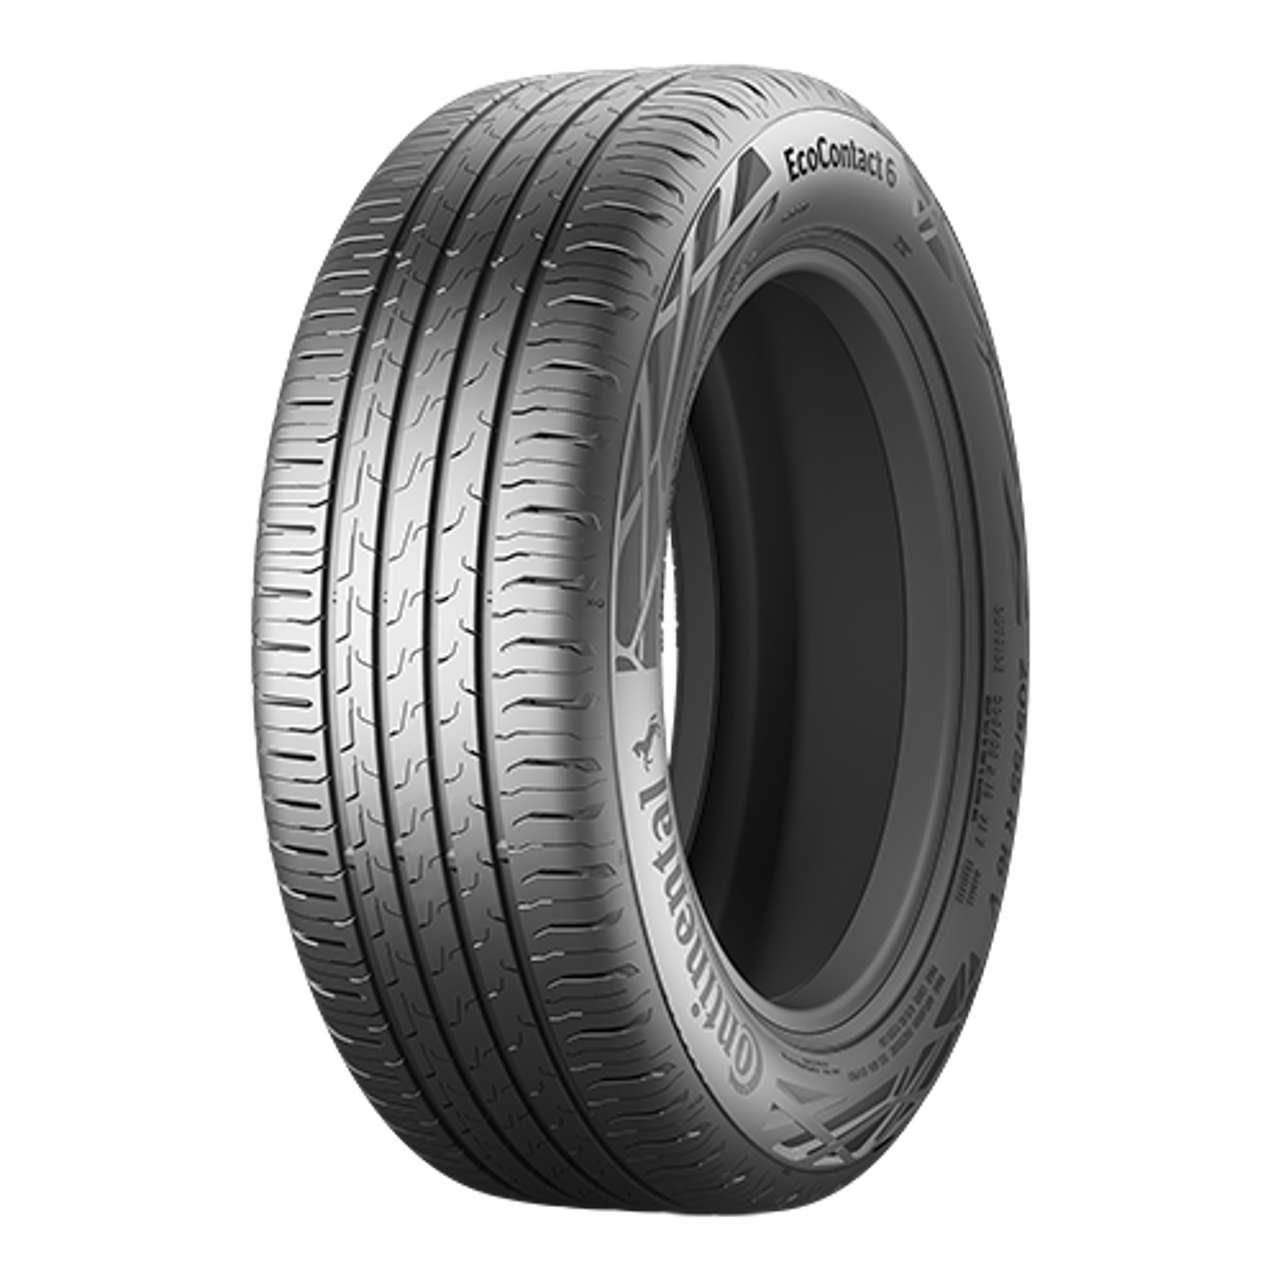 CONTINENTAL ECOCONTACT 6 205/50R19 94H BSW